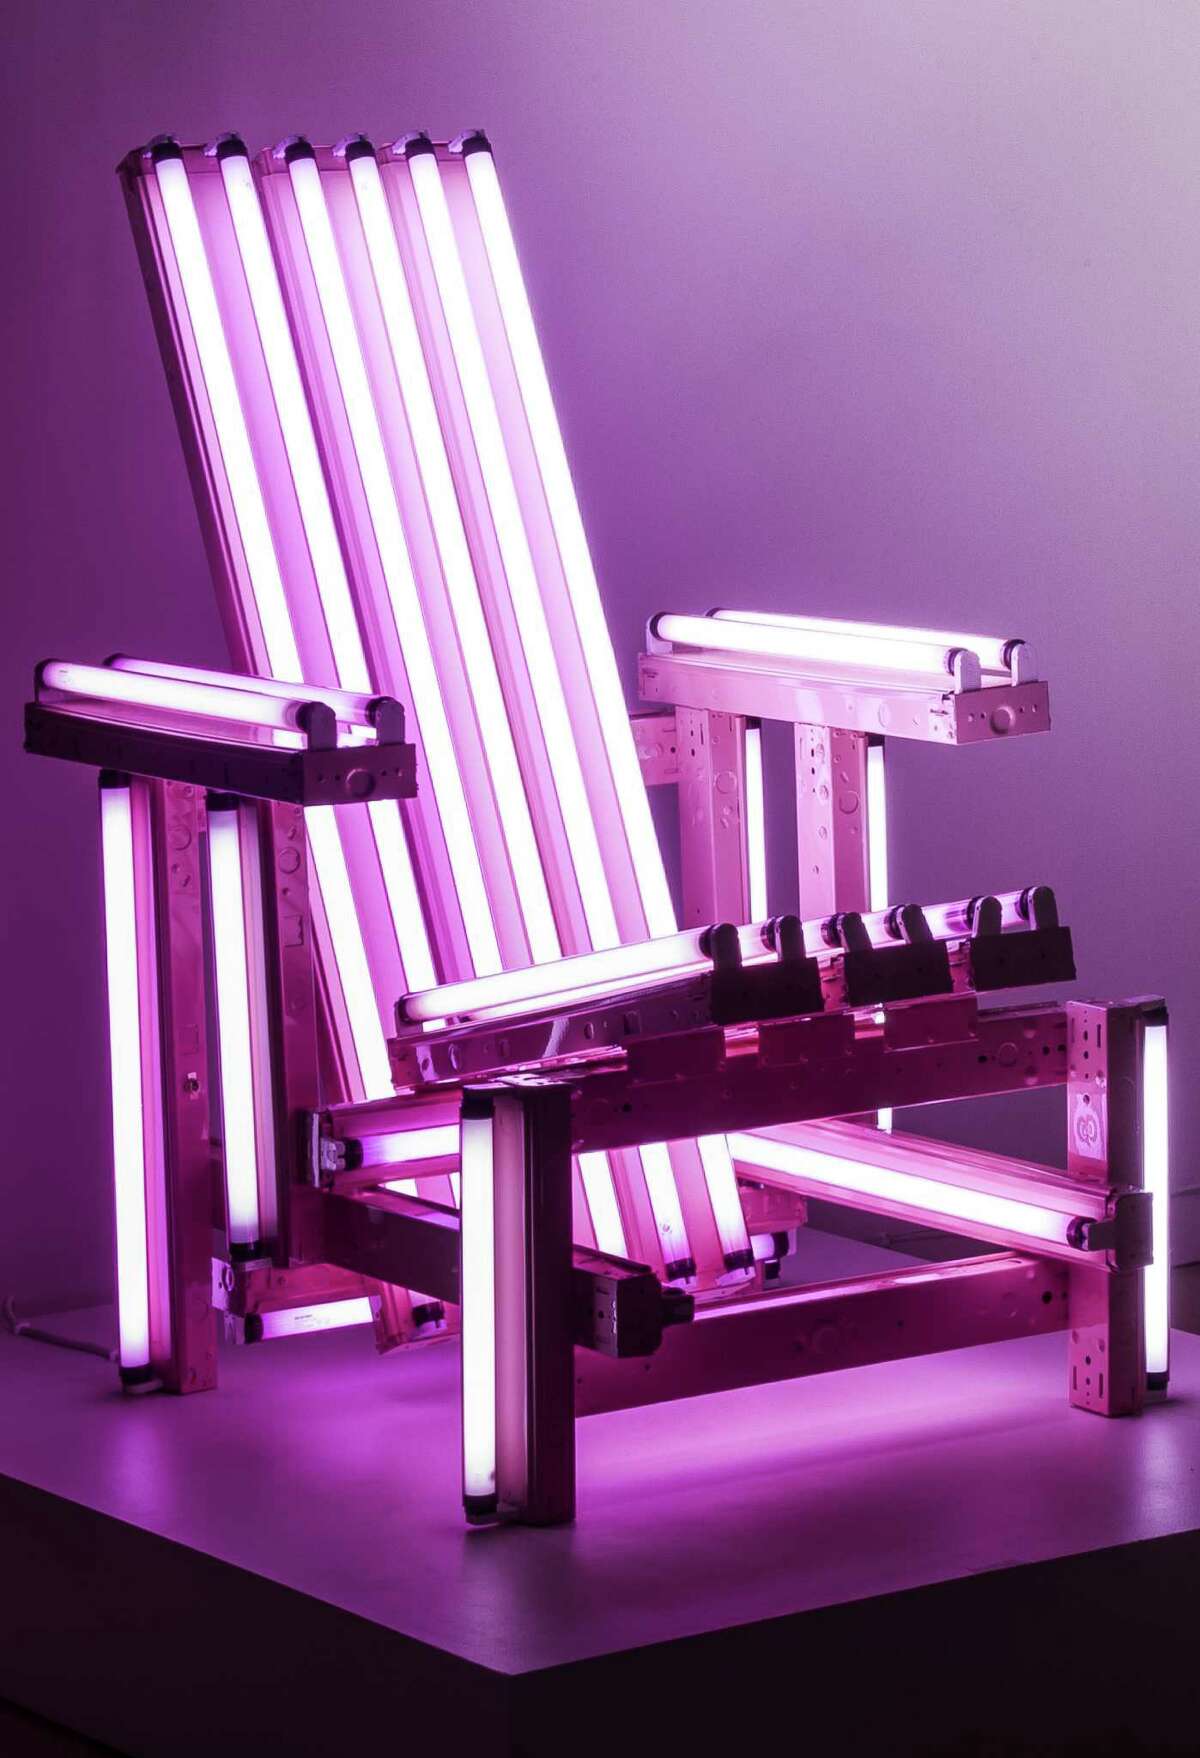 “Pink Electric Chair” is by Chilean artist Iván Navarro.